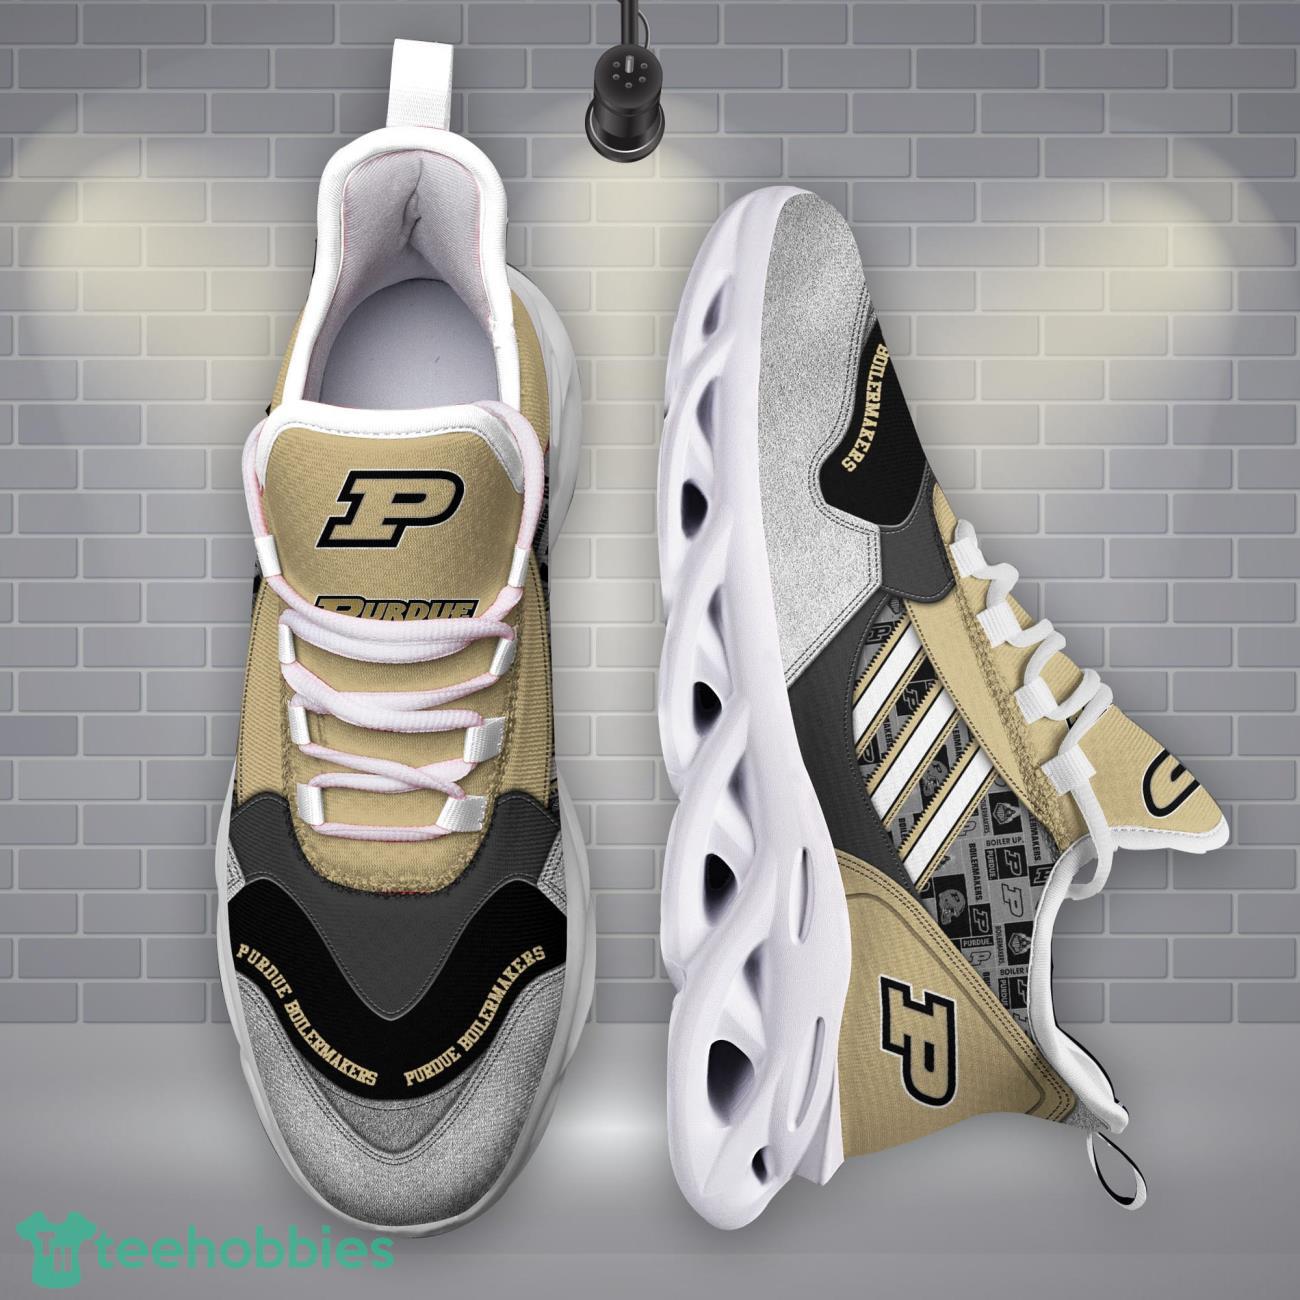 Purdue Boilermakers NCAA3 Logo Sport Team Max Soul Shoes Clunky Running Sneakers Product Photo 1